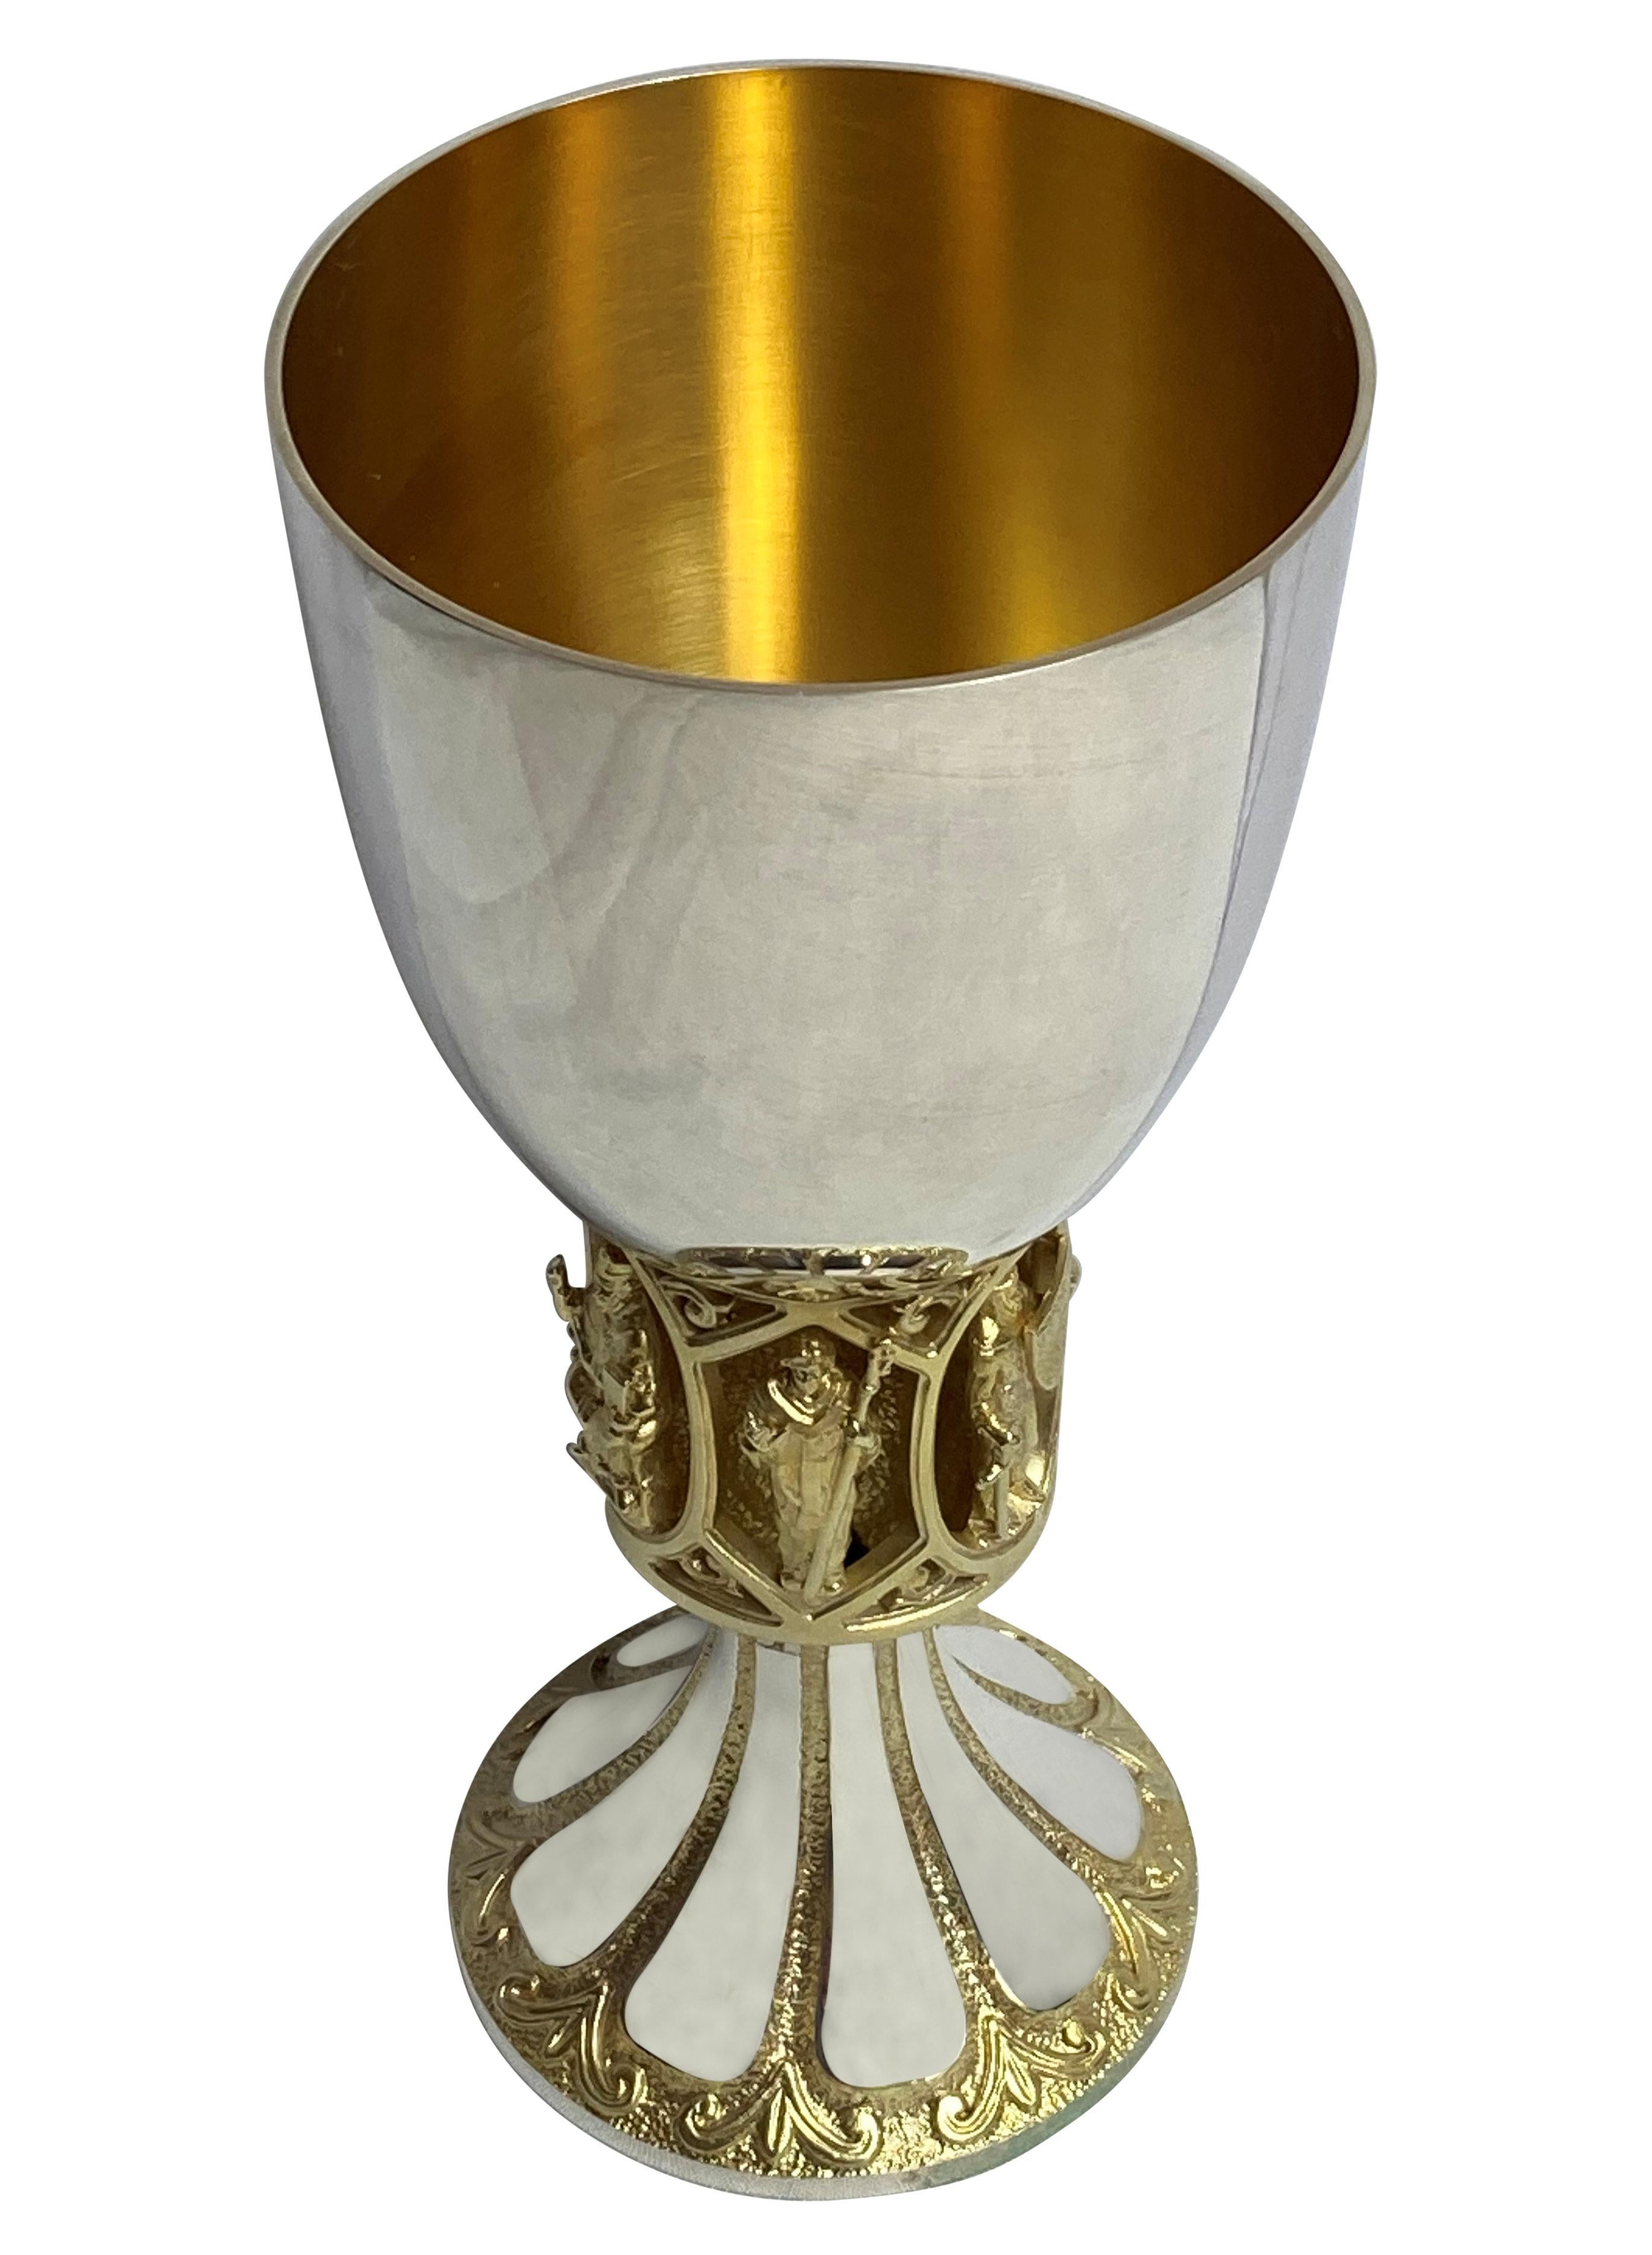 An English Elizabeth II first edition silver and silver gilt chalice, by Hector Miller. There were 500 made and this is 1/500, which belonged to the Dean of Canterbury who commissioned them. Finely executed depicting Canterbury Saints, The Black